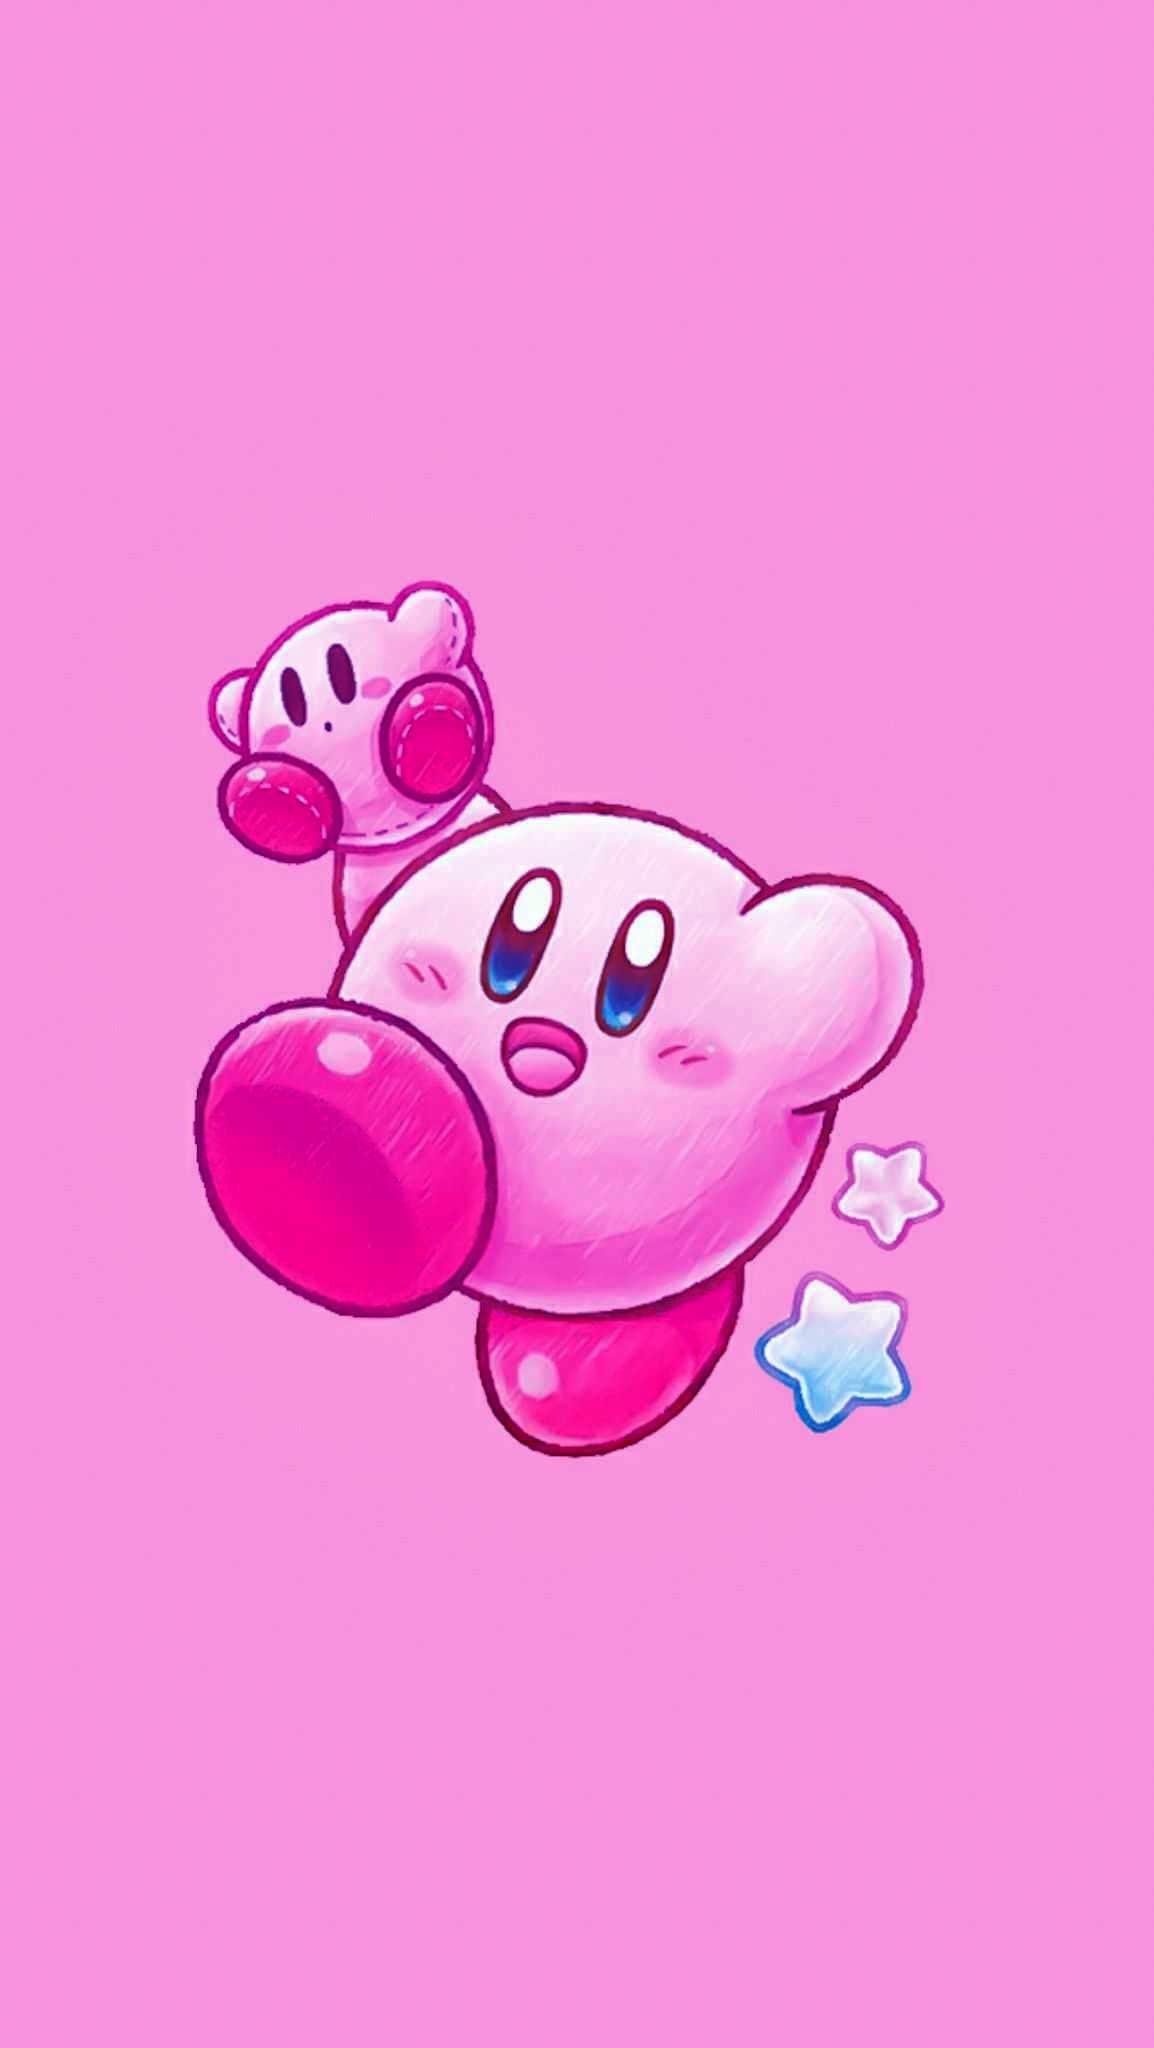 Kirby wallpaper I made, I think it's pretty good for my first one. Lemme  know what you guys think! : r/S10wallpapers